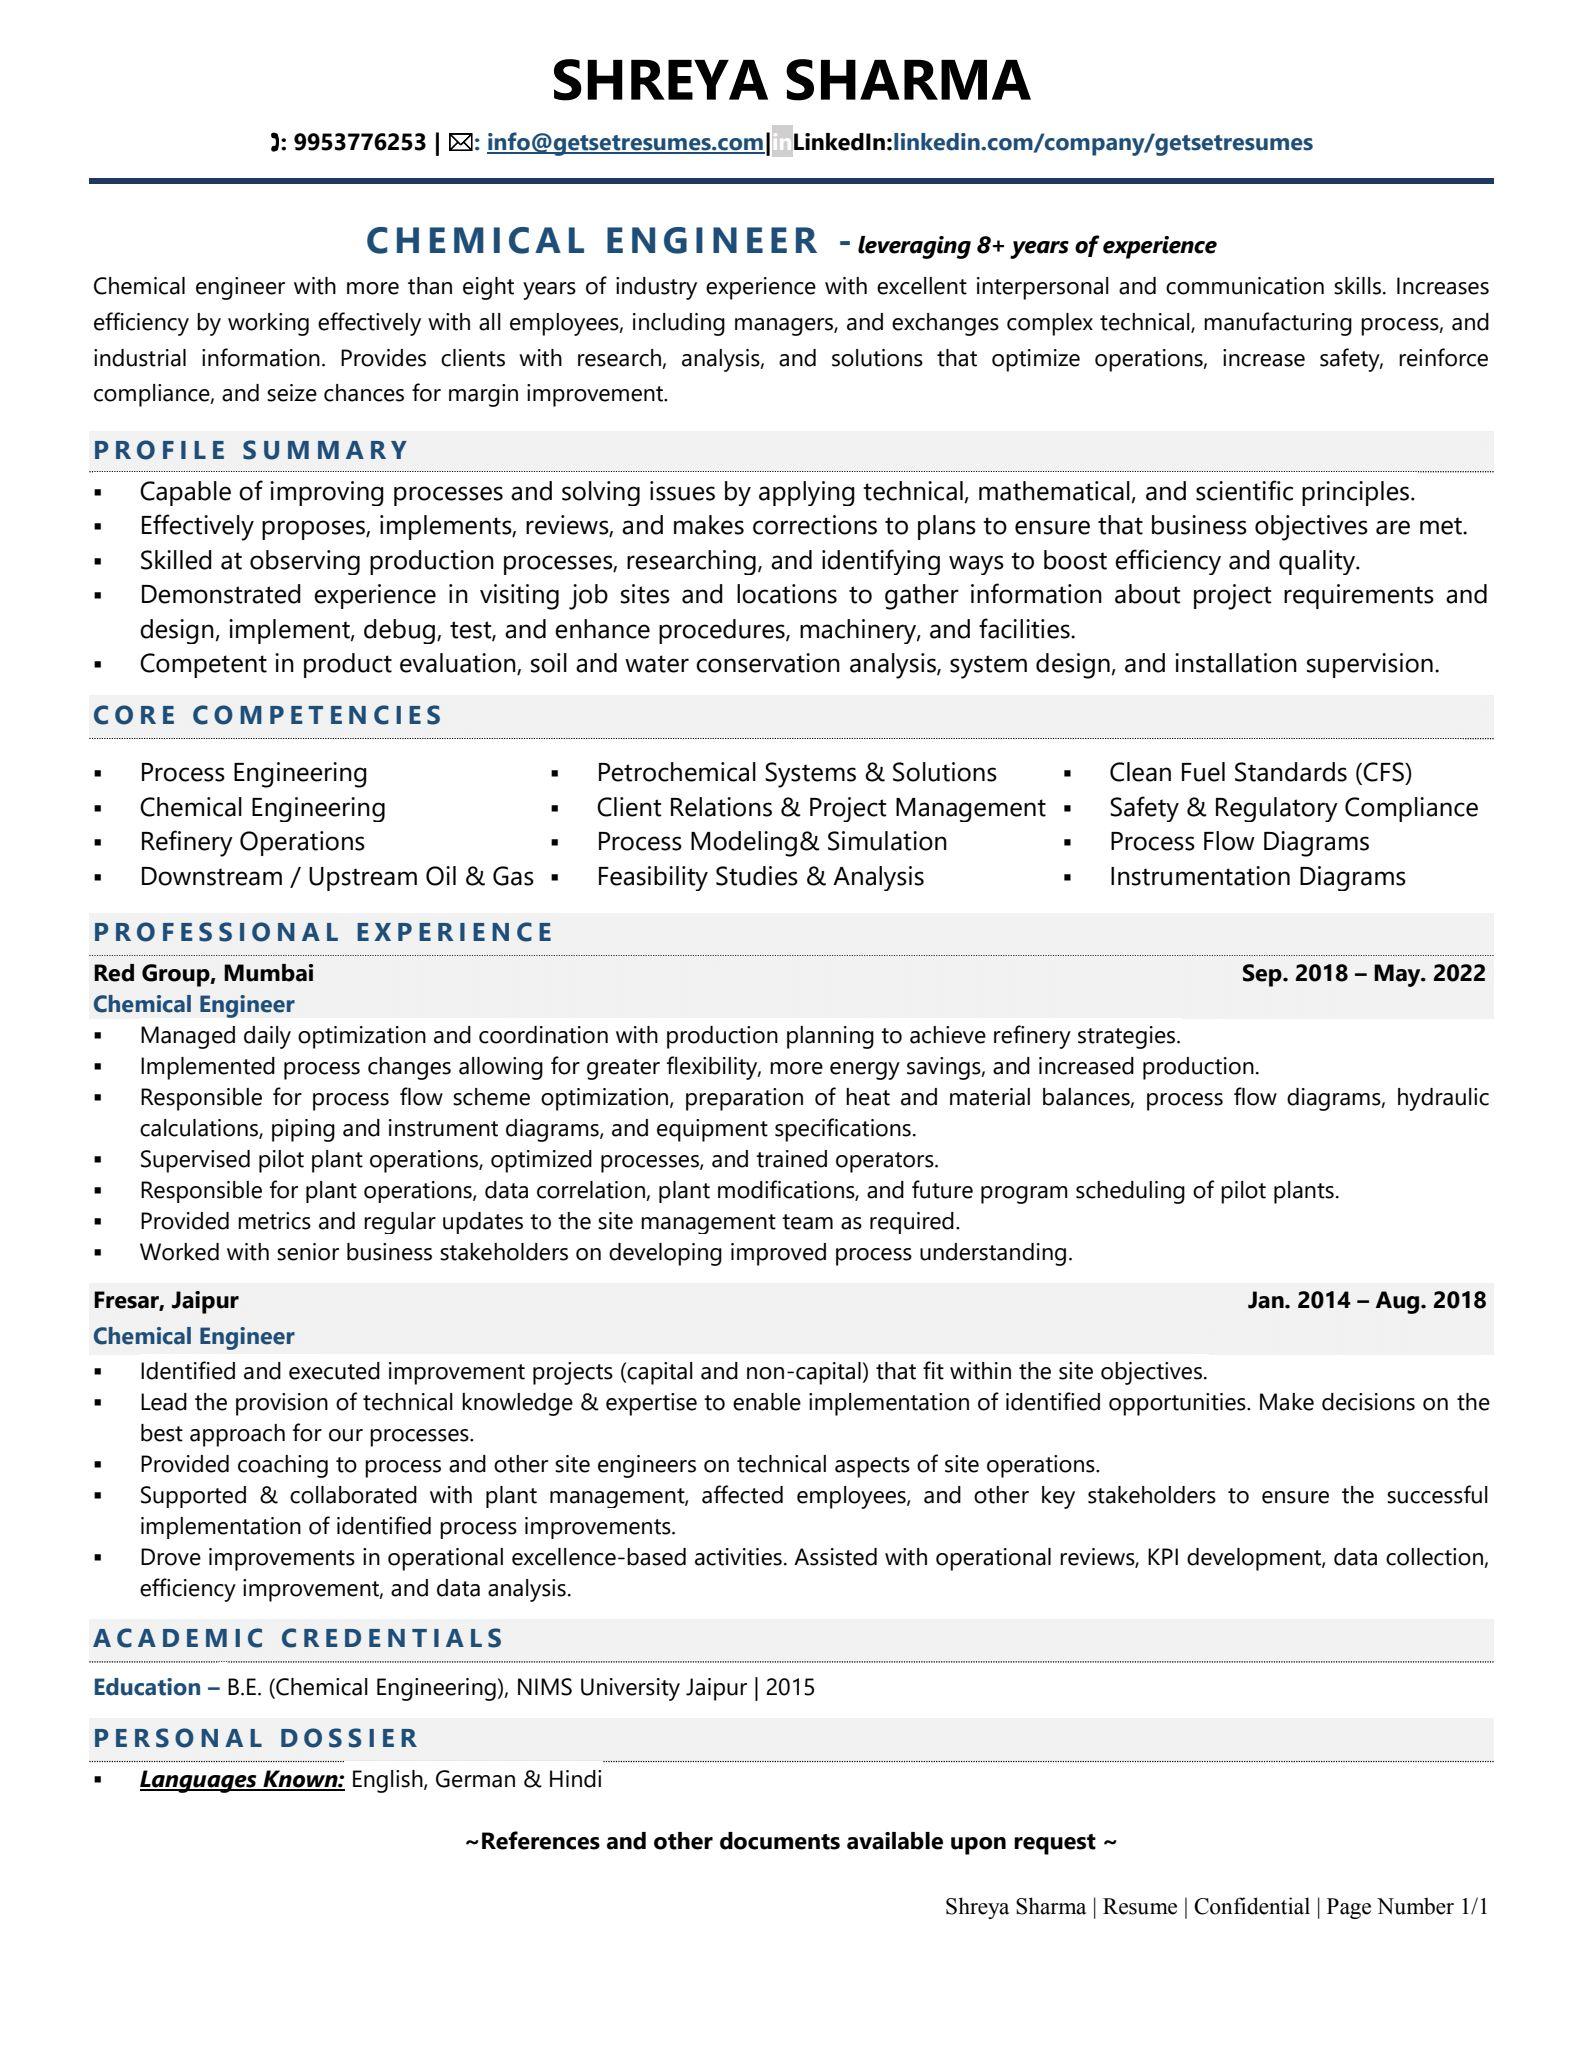 Chemical Engineer - Resume Example & Template